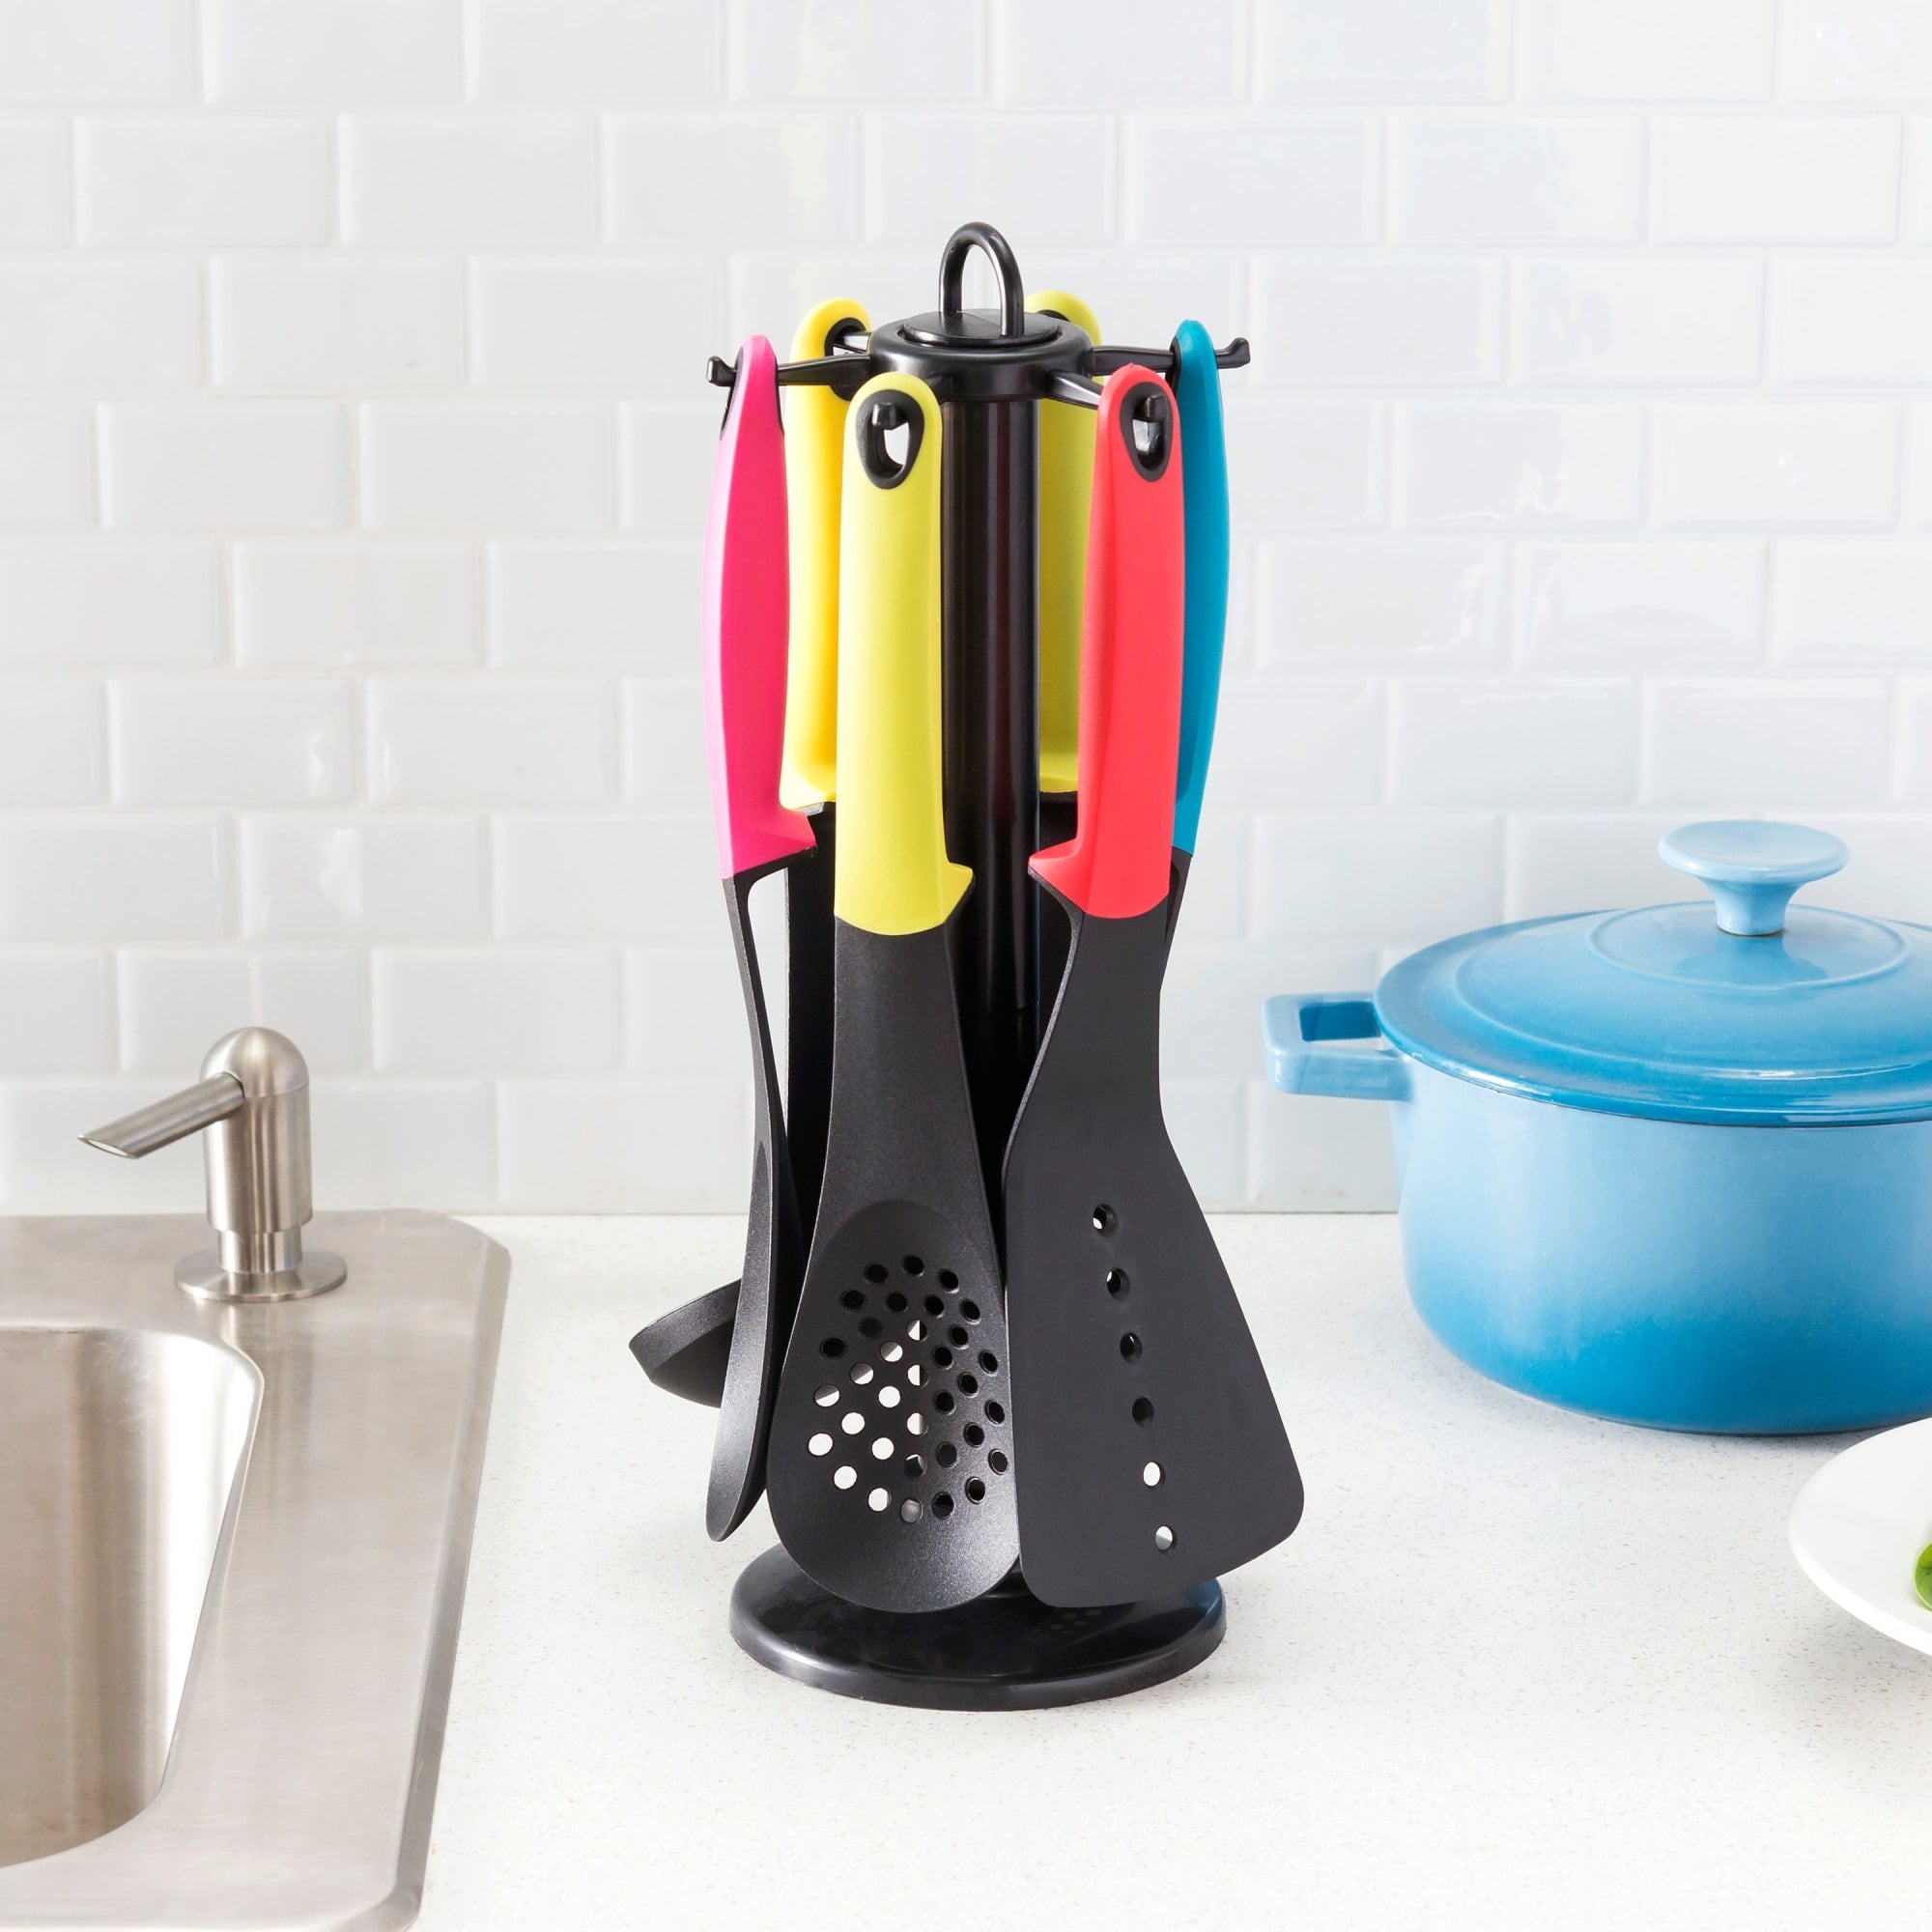 Home Basics 6 Piece Silicone Utensil Set, Multi-Color $10.00 EACH, CASE PACK OF 12